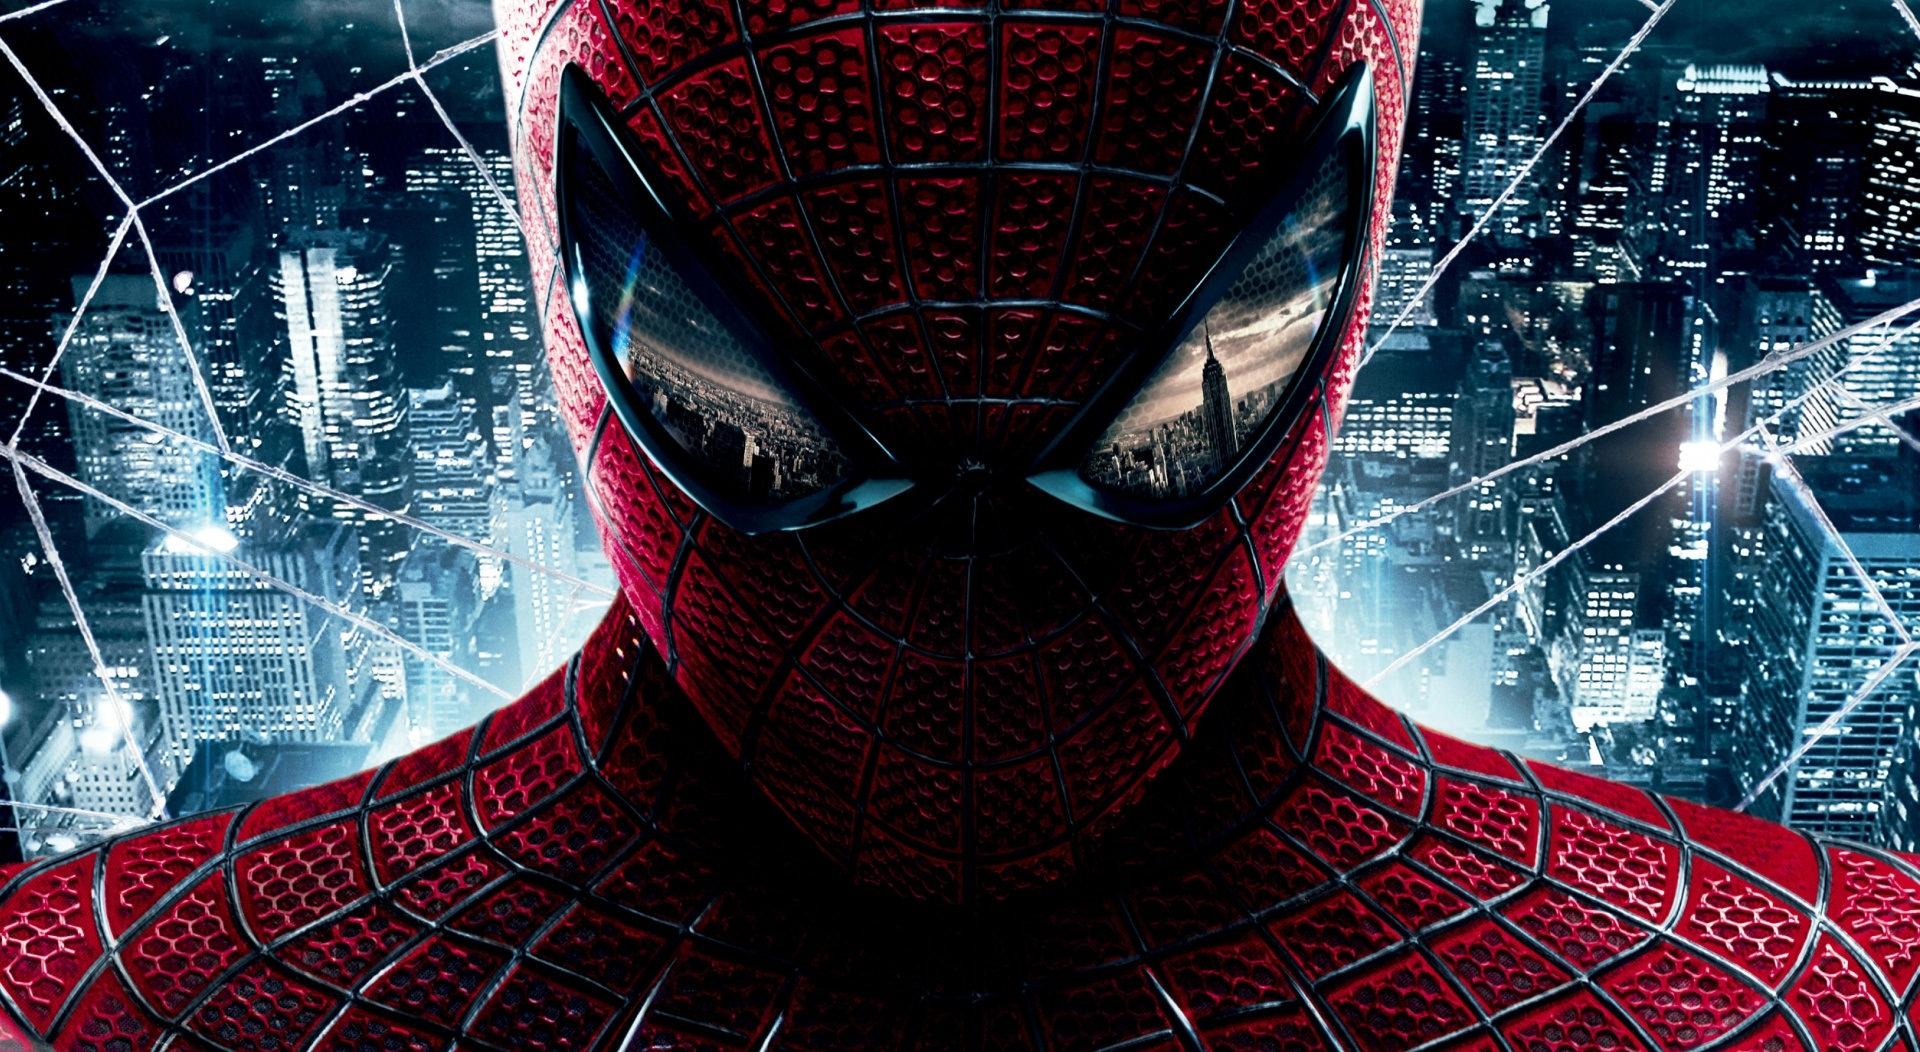 The Amazing Spider Man Wallpaper HD FREE HD WALLPAPERS